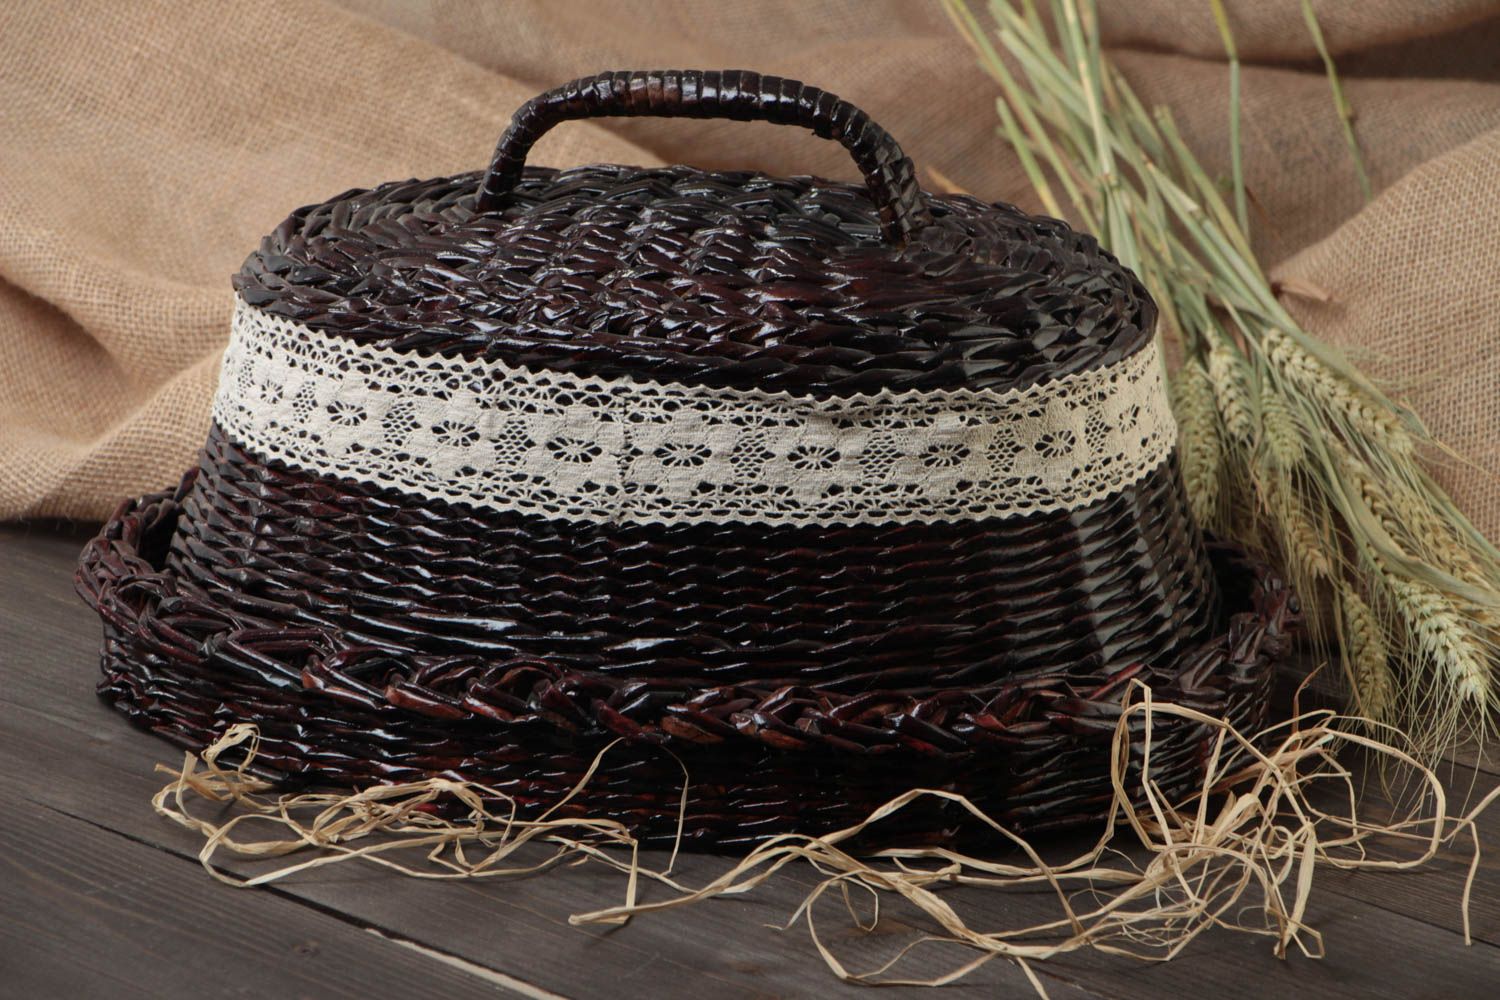 Handmade decorative black bread basket woven of paper tubes trimmed with lace photo 1